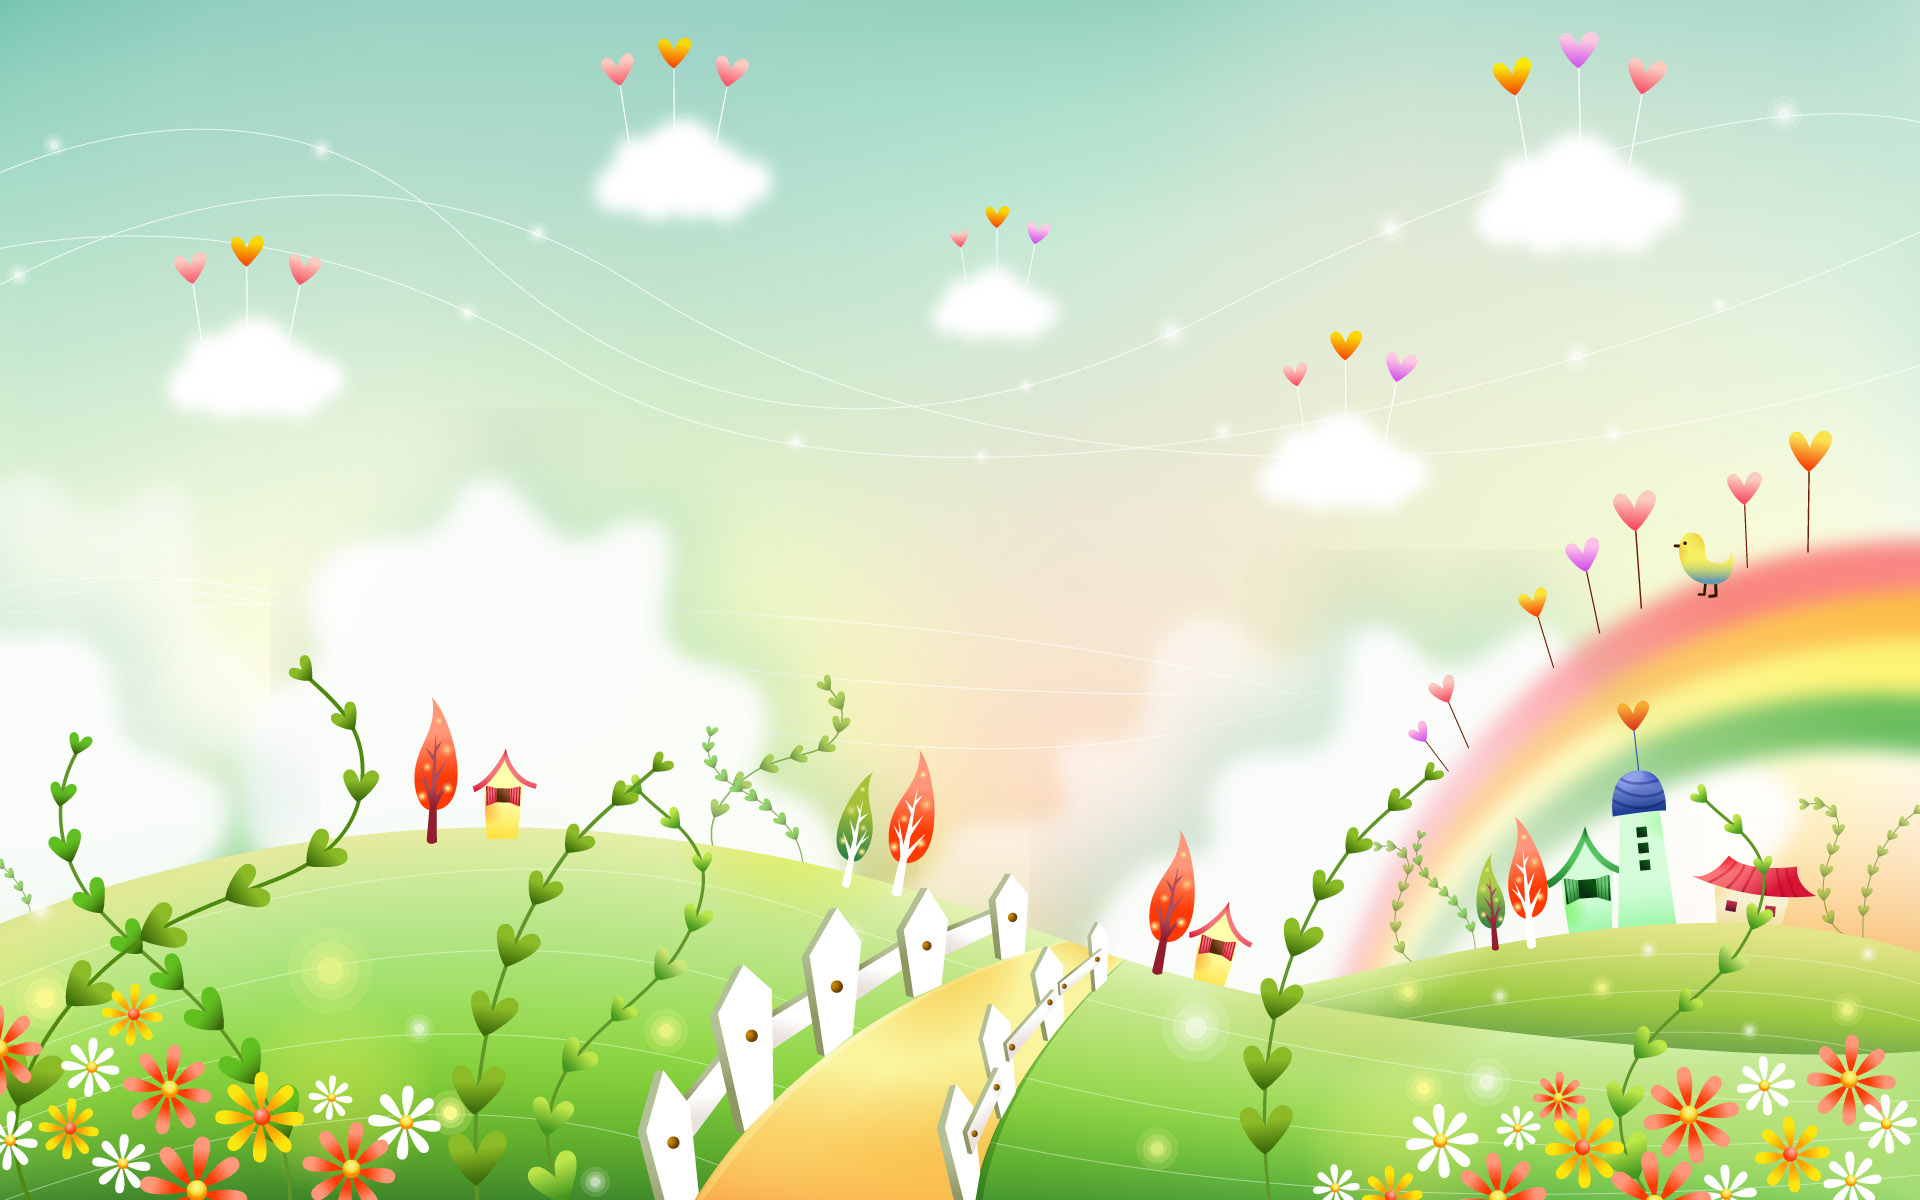 Clipart background timy